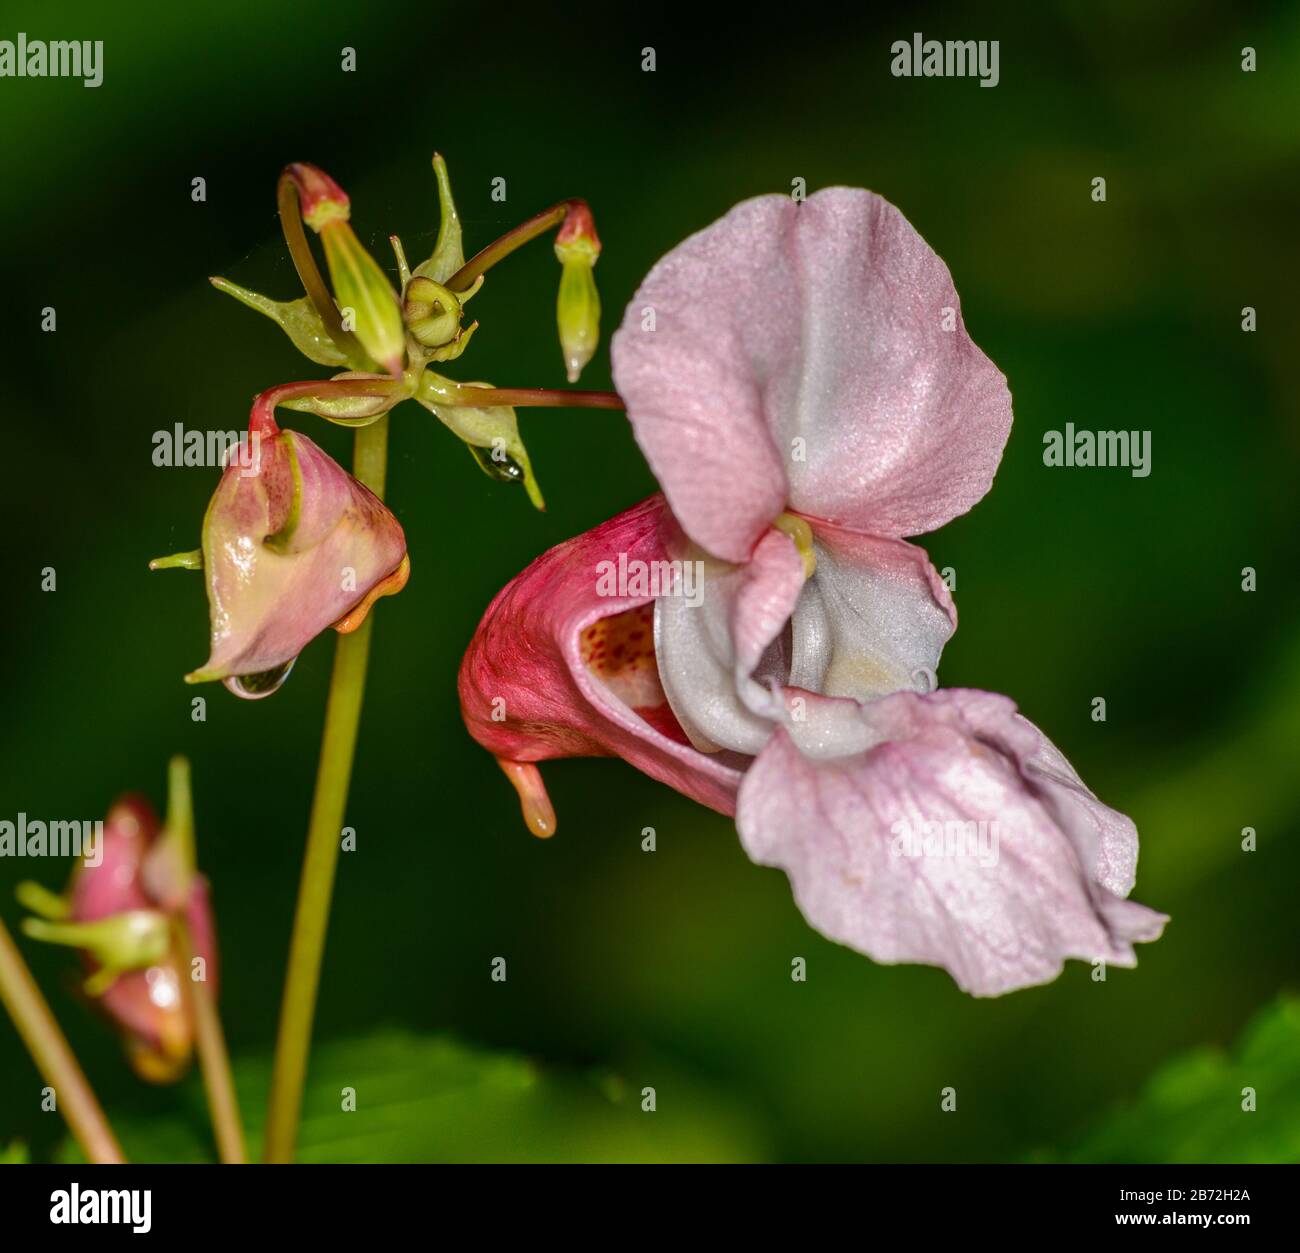 Rosa Himalayan Balsam, Kiss-me-on-the-Mountain, Polizistenhelm, Bobby Tops, Copper Tops oder Gnome's Hatstand (Impatiens glandulifera royle) Blume Stockfoto